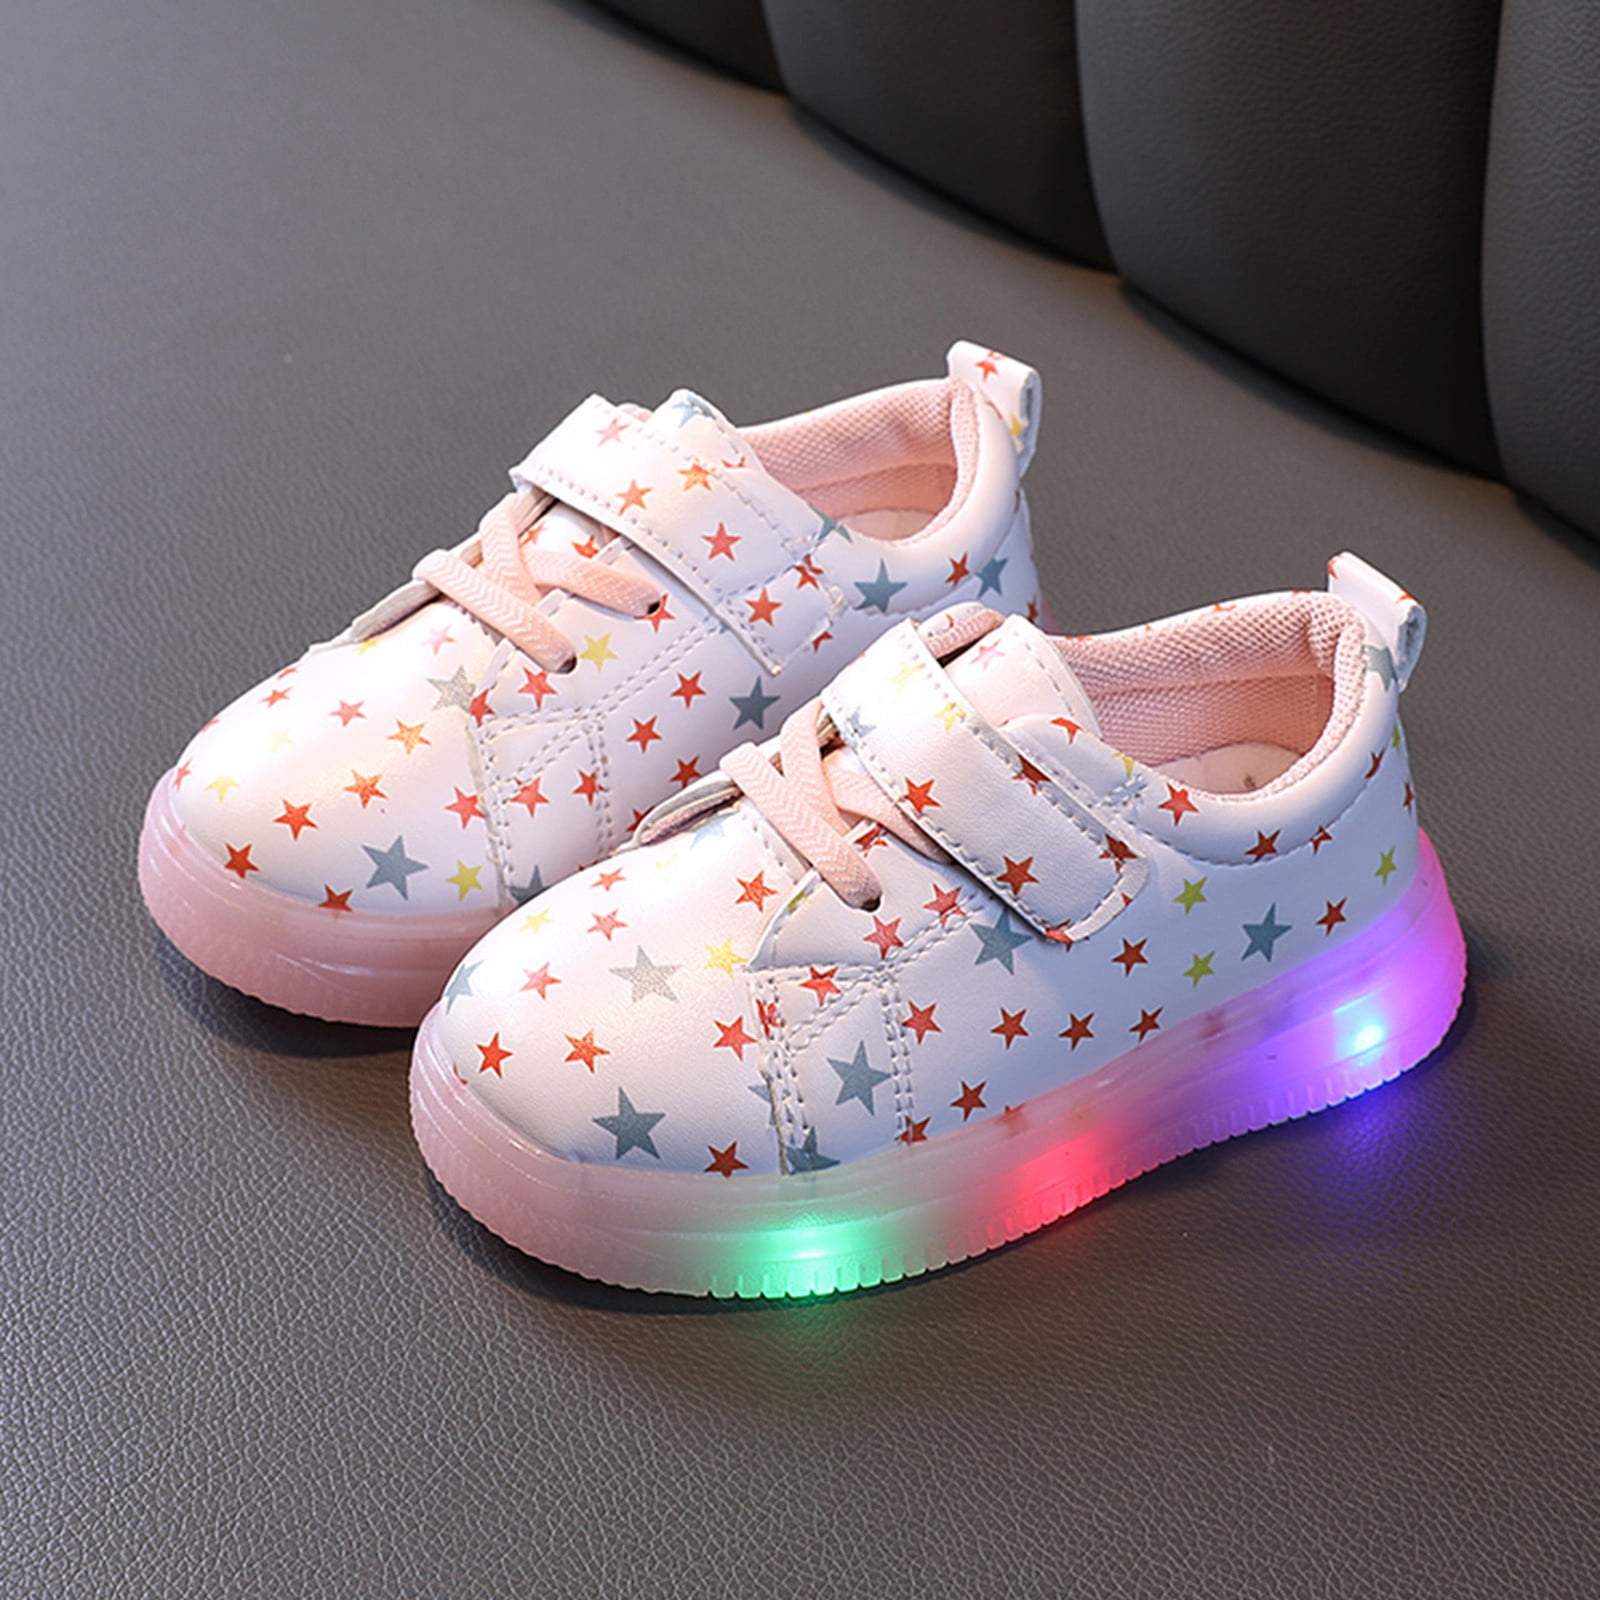 Cathalem Girl Shoes Size 4 Kids Led Light Bling Children Sport Shoes Baby  Luminous Girls Baby Shoes Toddler Shoes Boy Size 10 Shoes Pink  Years -  